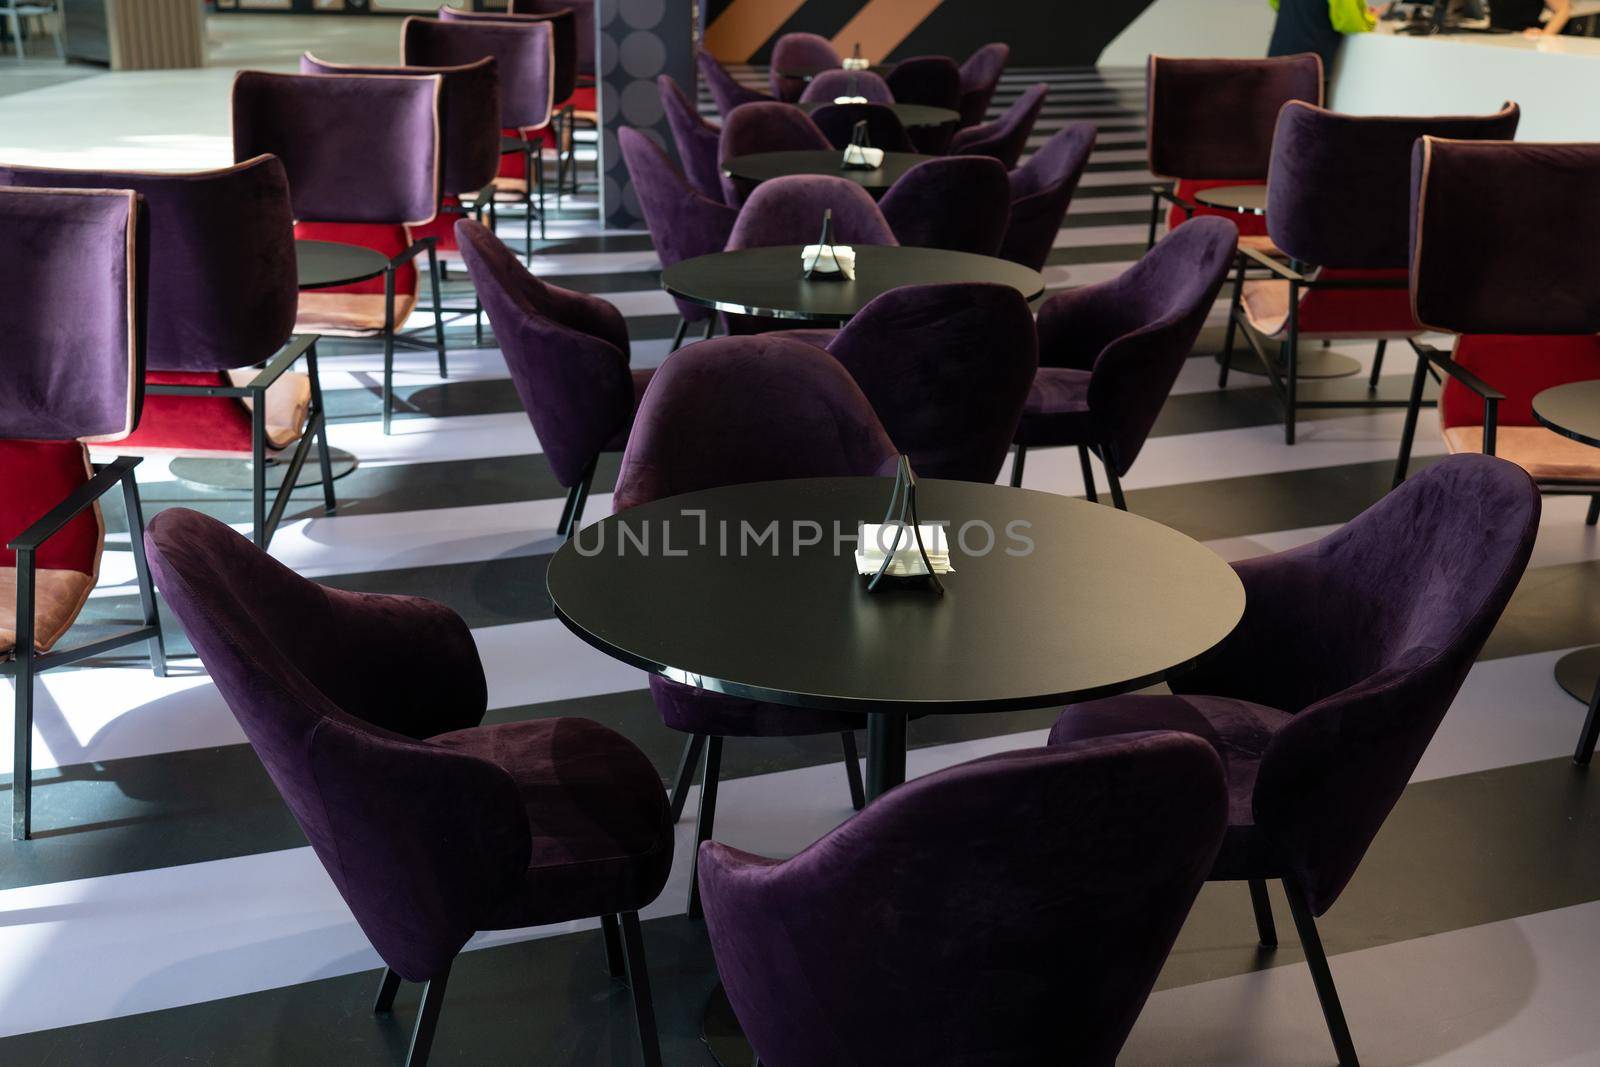 A row of tables with soft comfortable violet chairs for visitors to the food court of a modern shopping center. People admire the beautiful view during the meal.